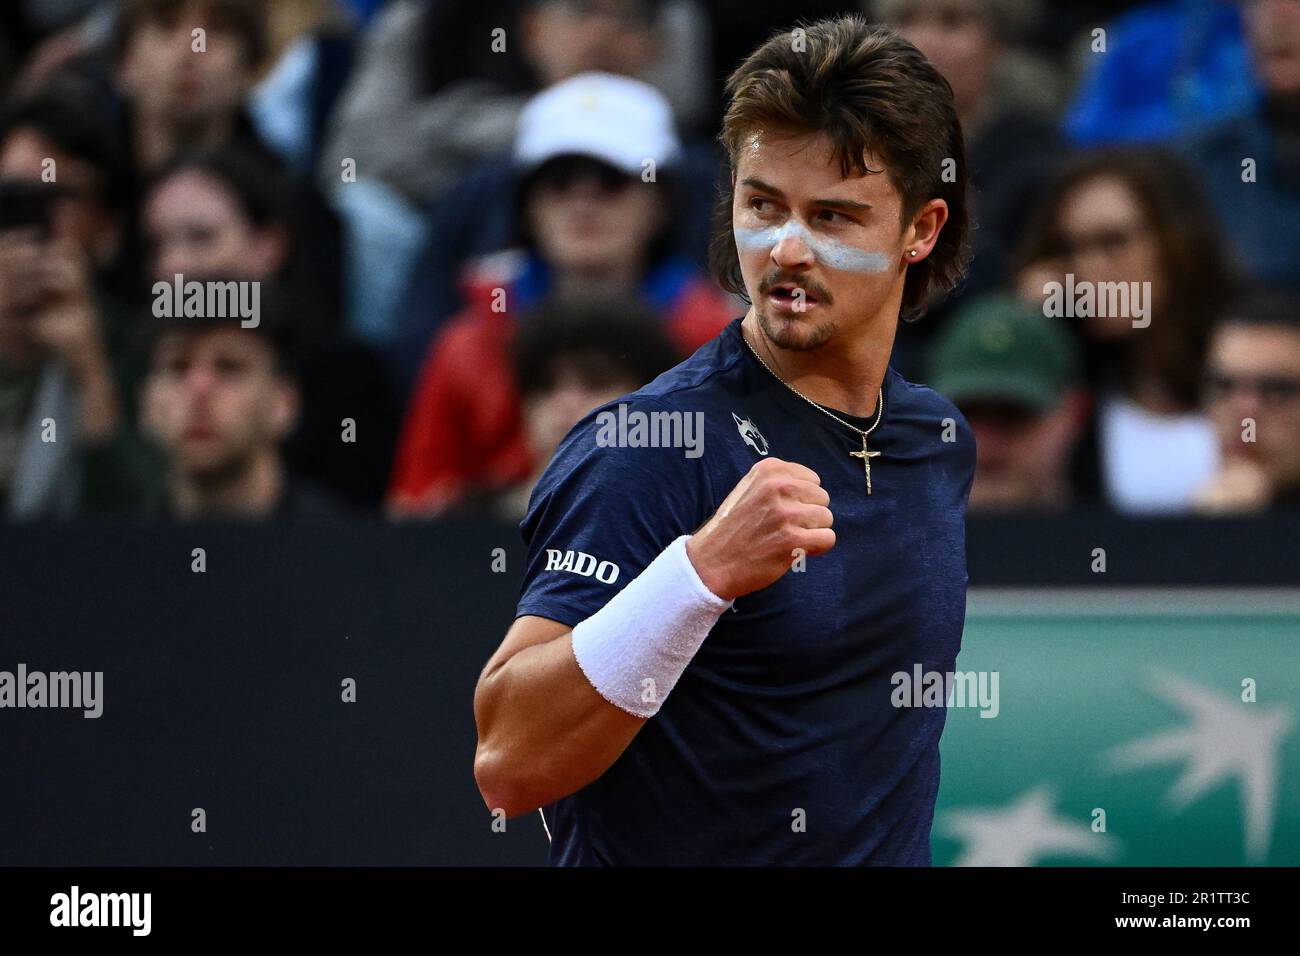 Rome, Italy. 15th May, 2023. Jeffrey John JJ Wolf of United States of America reacts during his match against Alexander Zverev of Germany at the Internazionali BNL d'Italia tennis tournament at Foro Italico in Rome, Italy on May 15th, 2023. Credit: Insidefoto di andrea staccioli/Alamy Live News Stock Photo